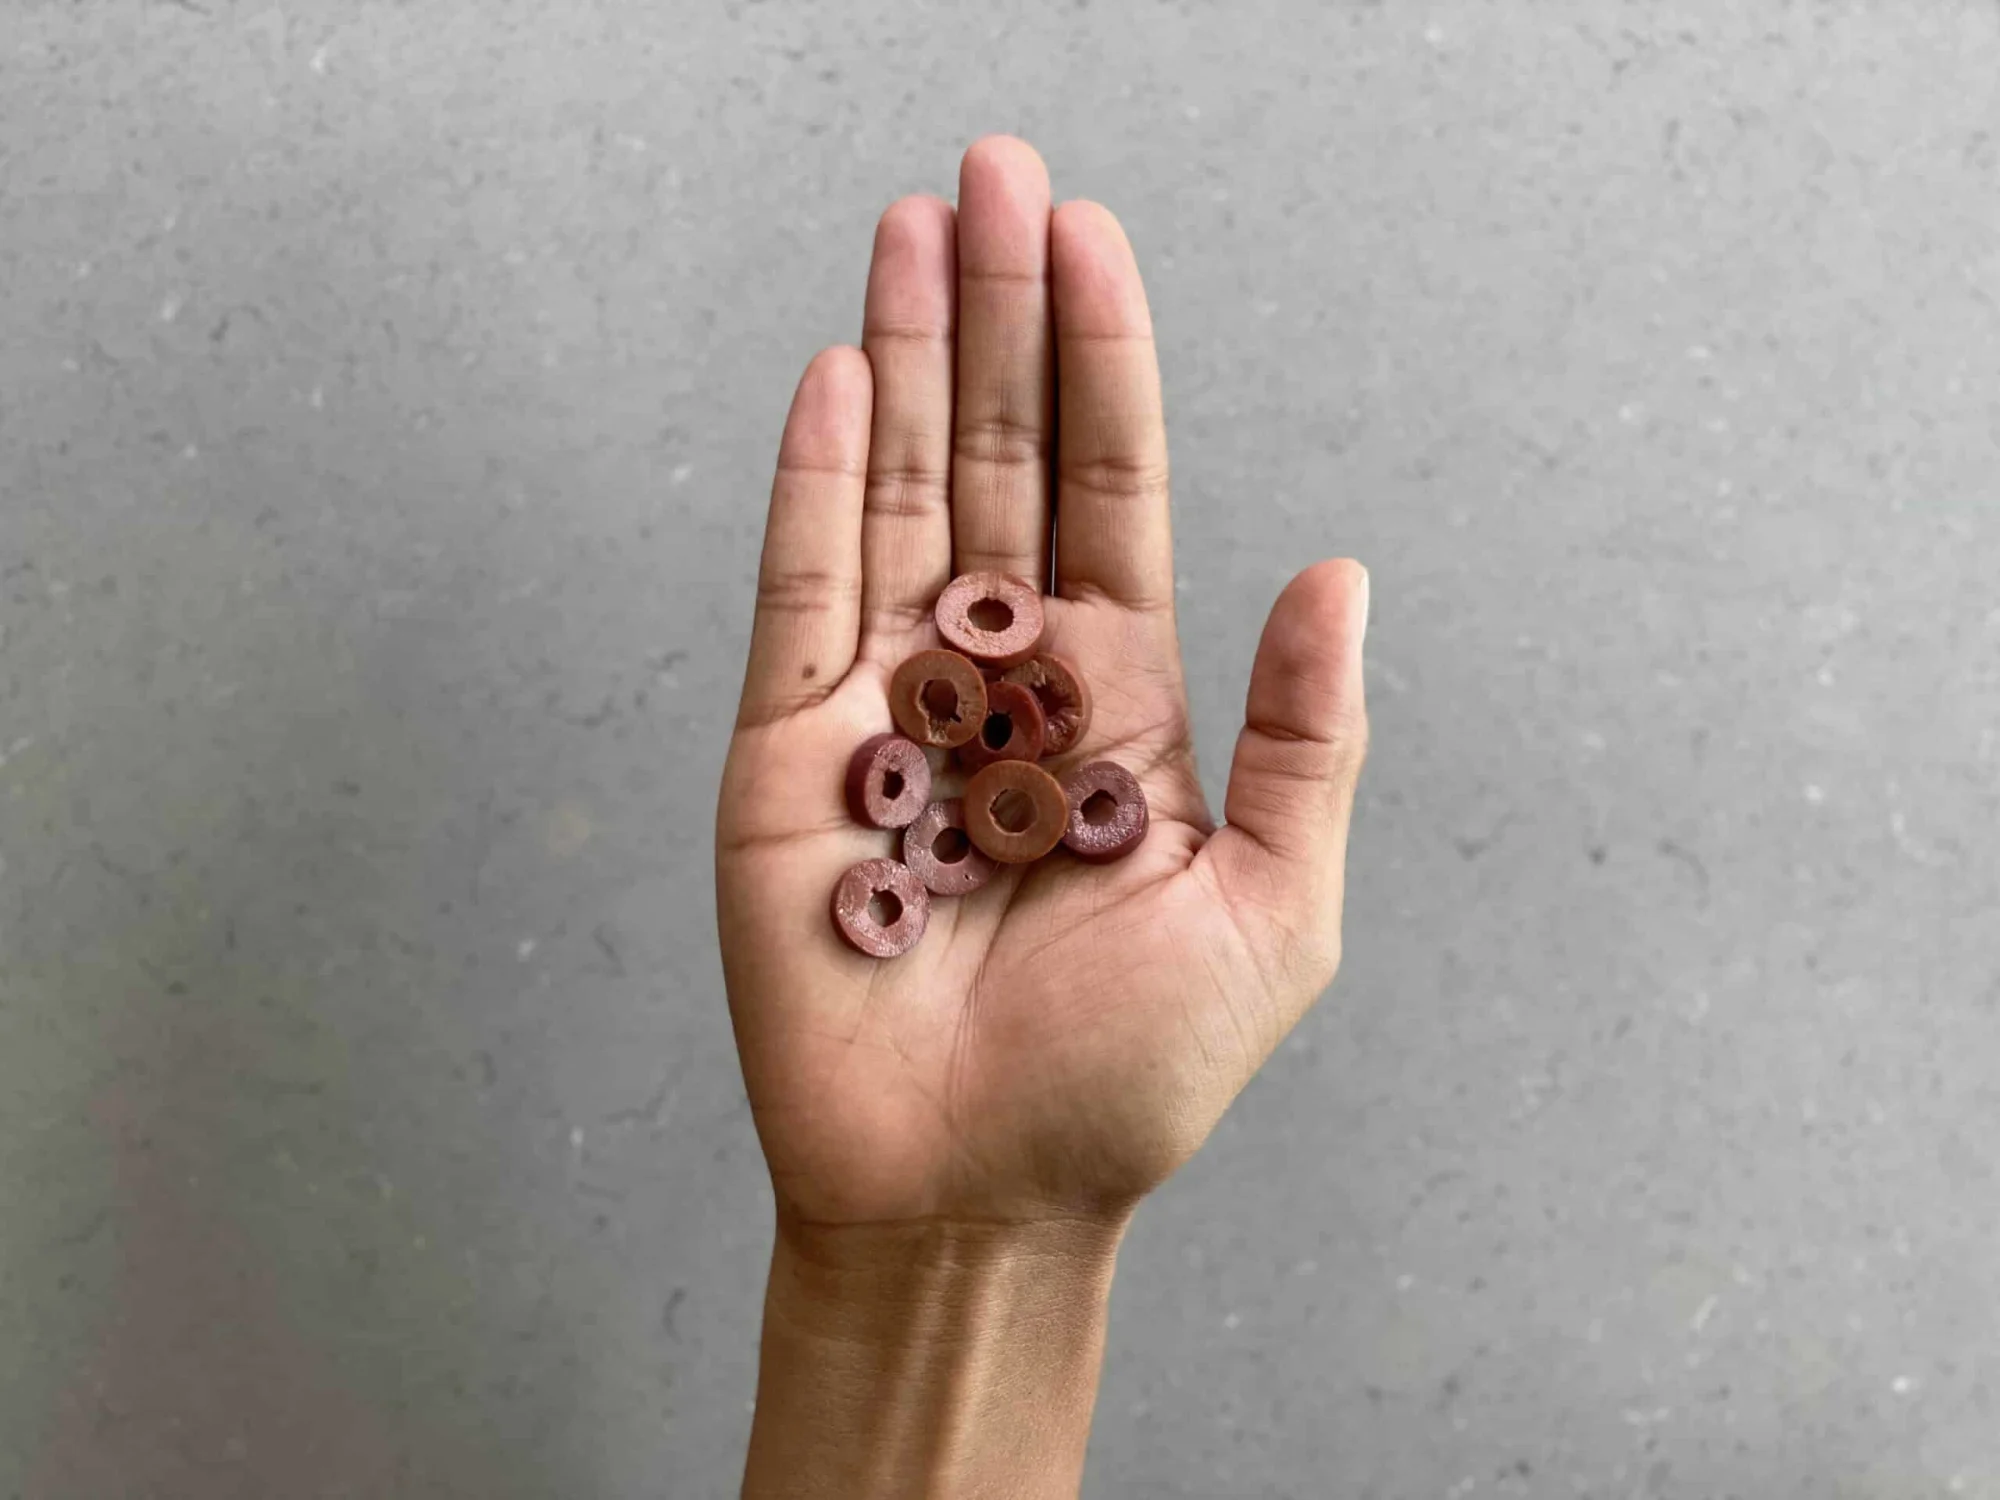 a hand holding a small pile of kalamata olives sliced into rings for children 12 months+